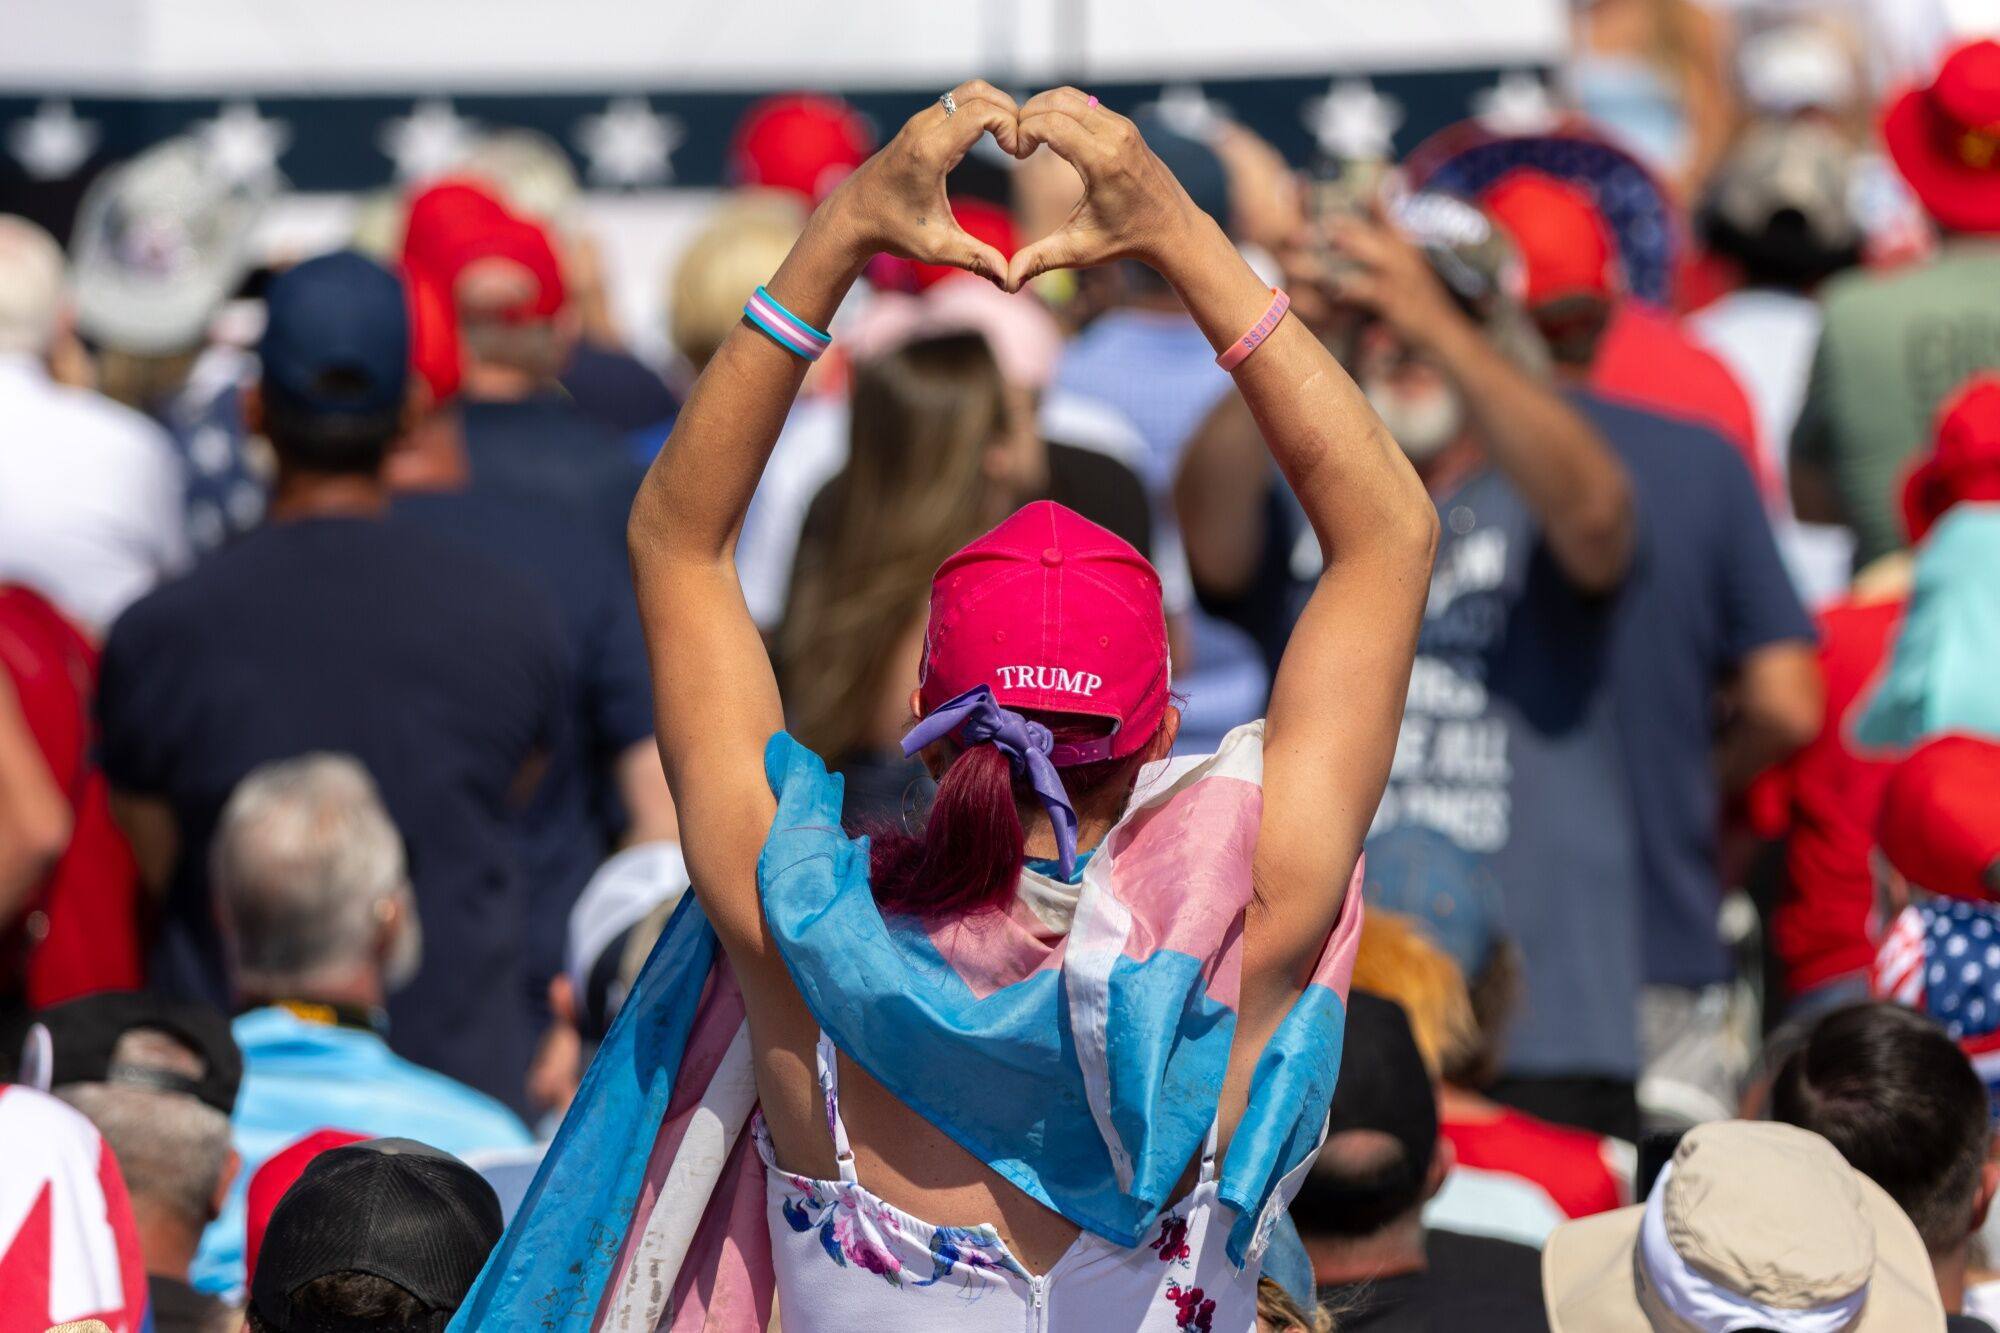 People attend a campaign event with former US president Donald Trump in Chesapeake, Virginia, on June 28, the day after the American presidential debate in which US President Joe Biden is widely considered to have stumbled. Photo: Bloomberg